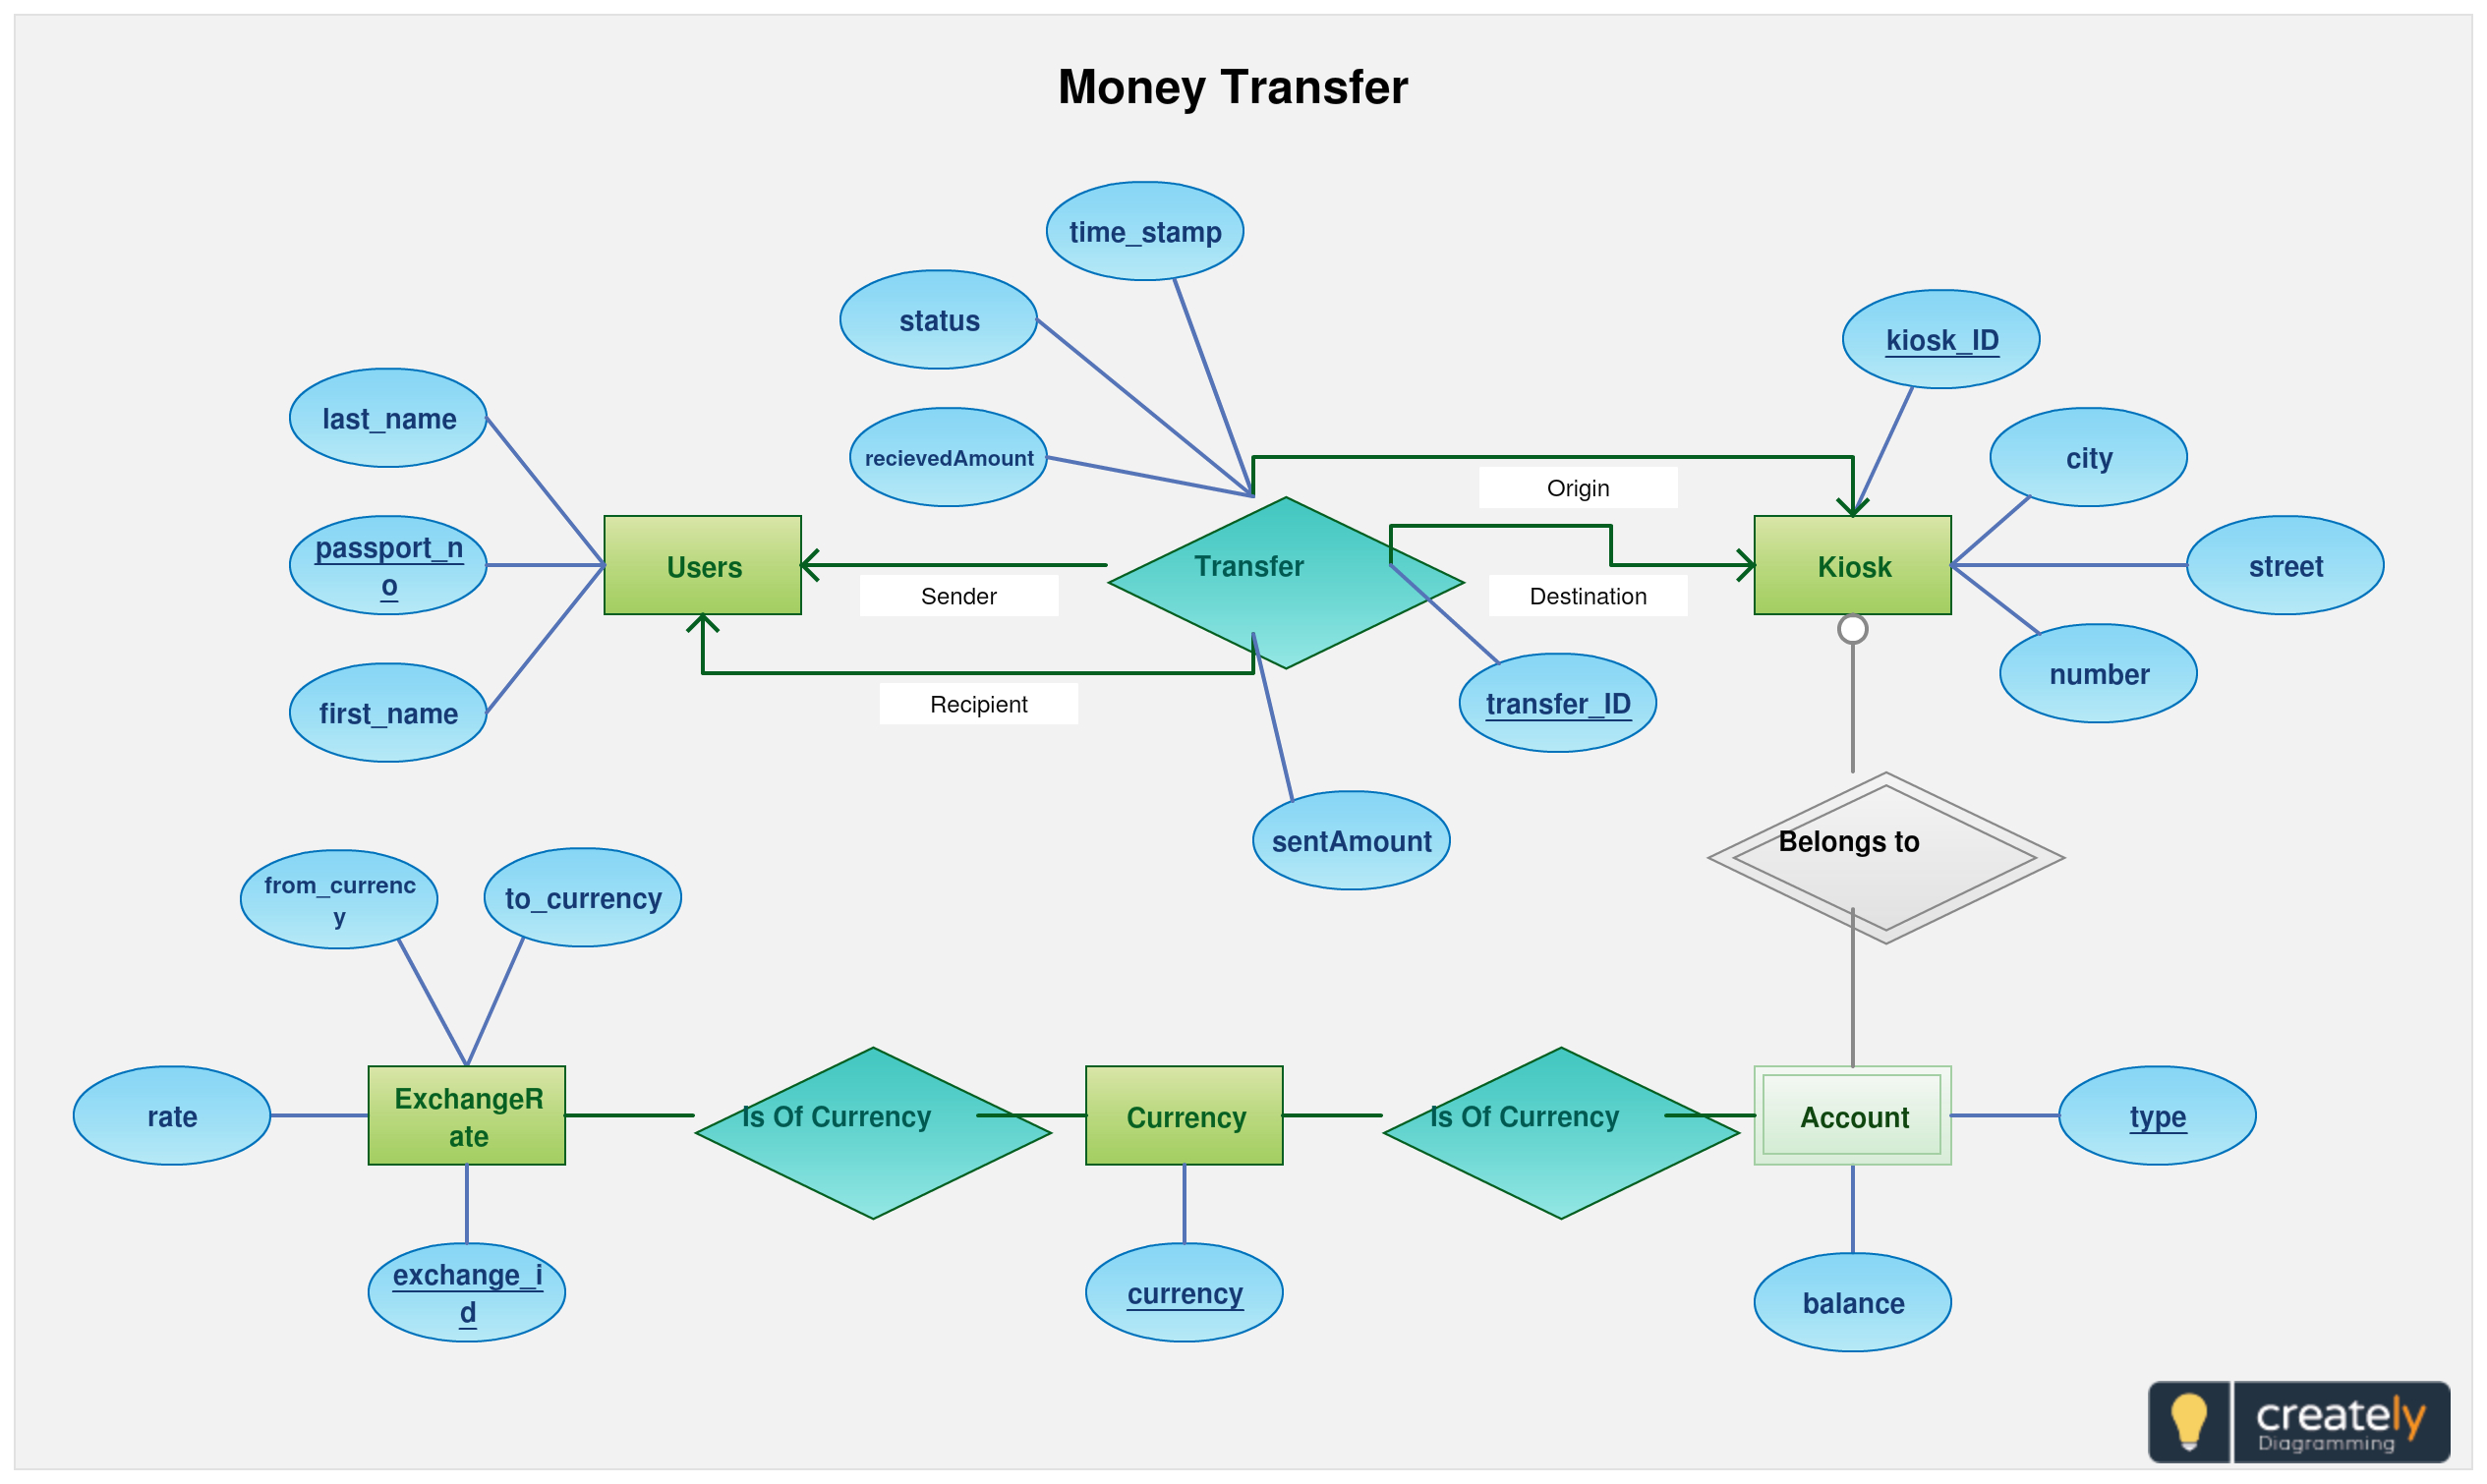 Entity Relationship Diagram Of Fund Transfer - Use This in Er Diagram Job Portal